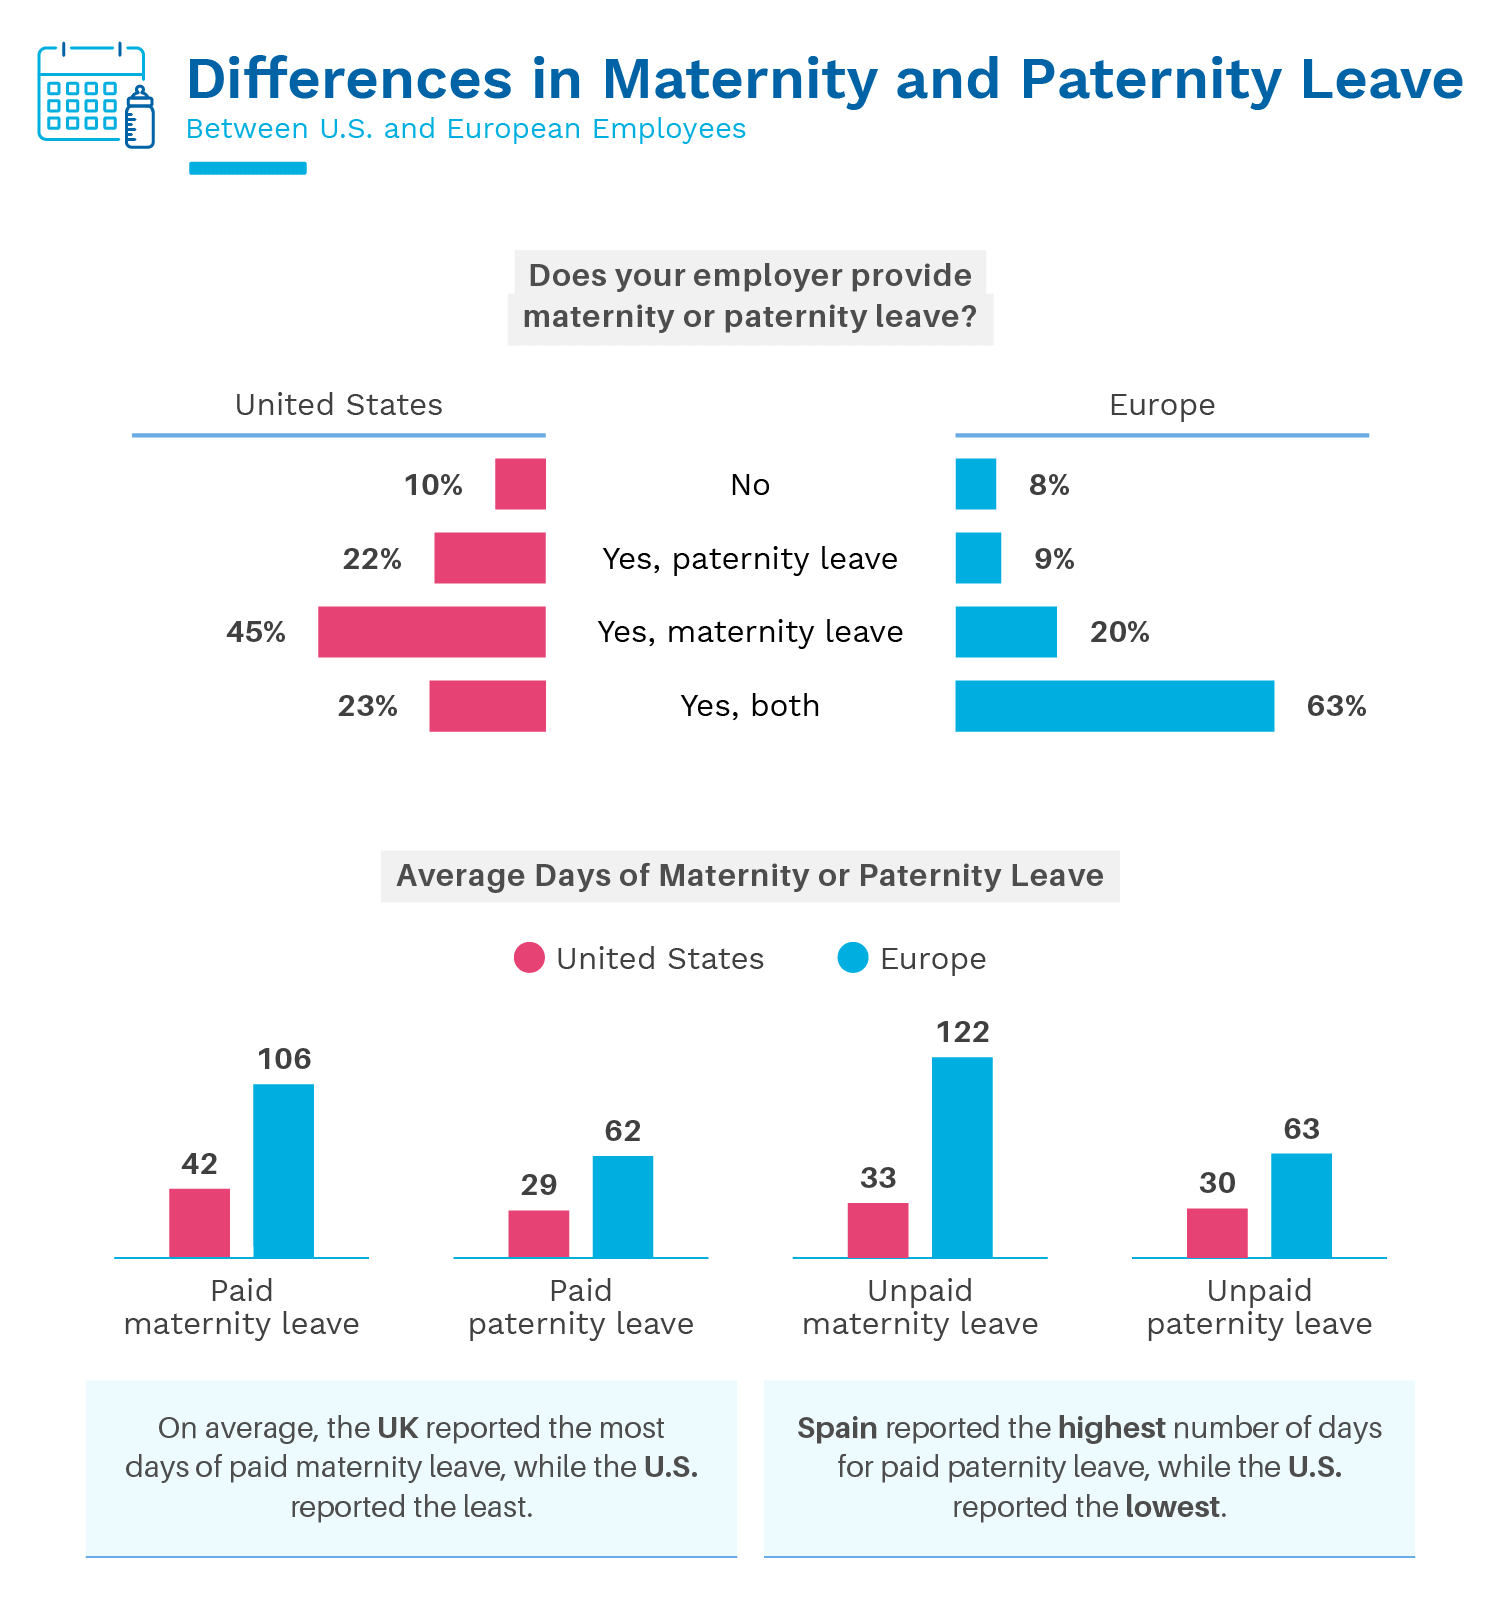 Differences in Maternity and Paternity Leave